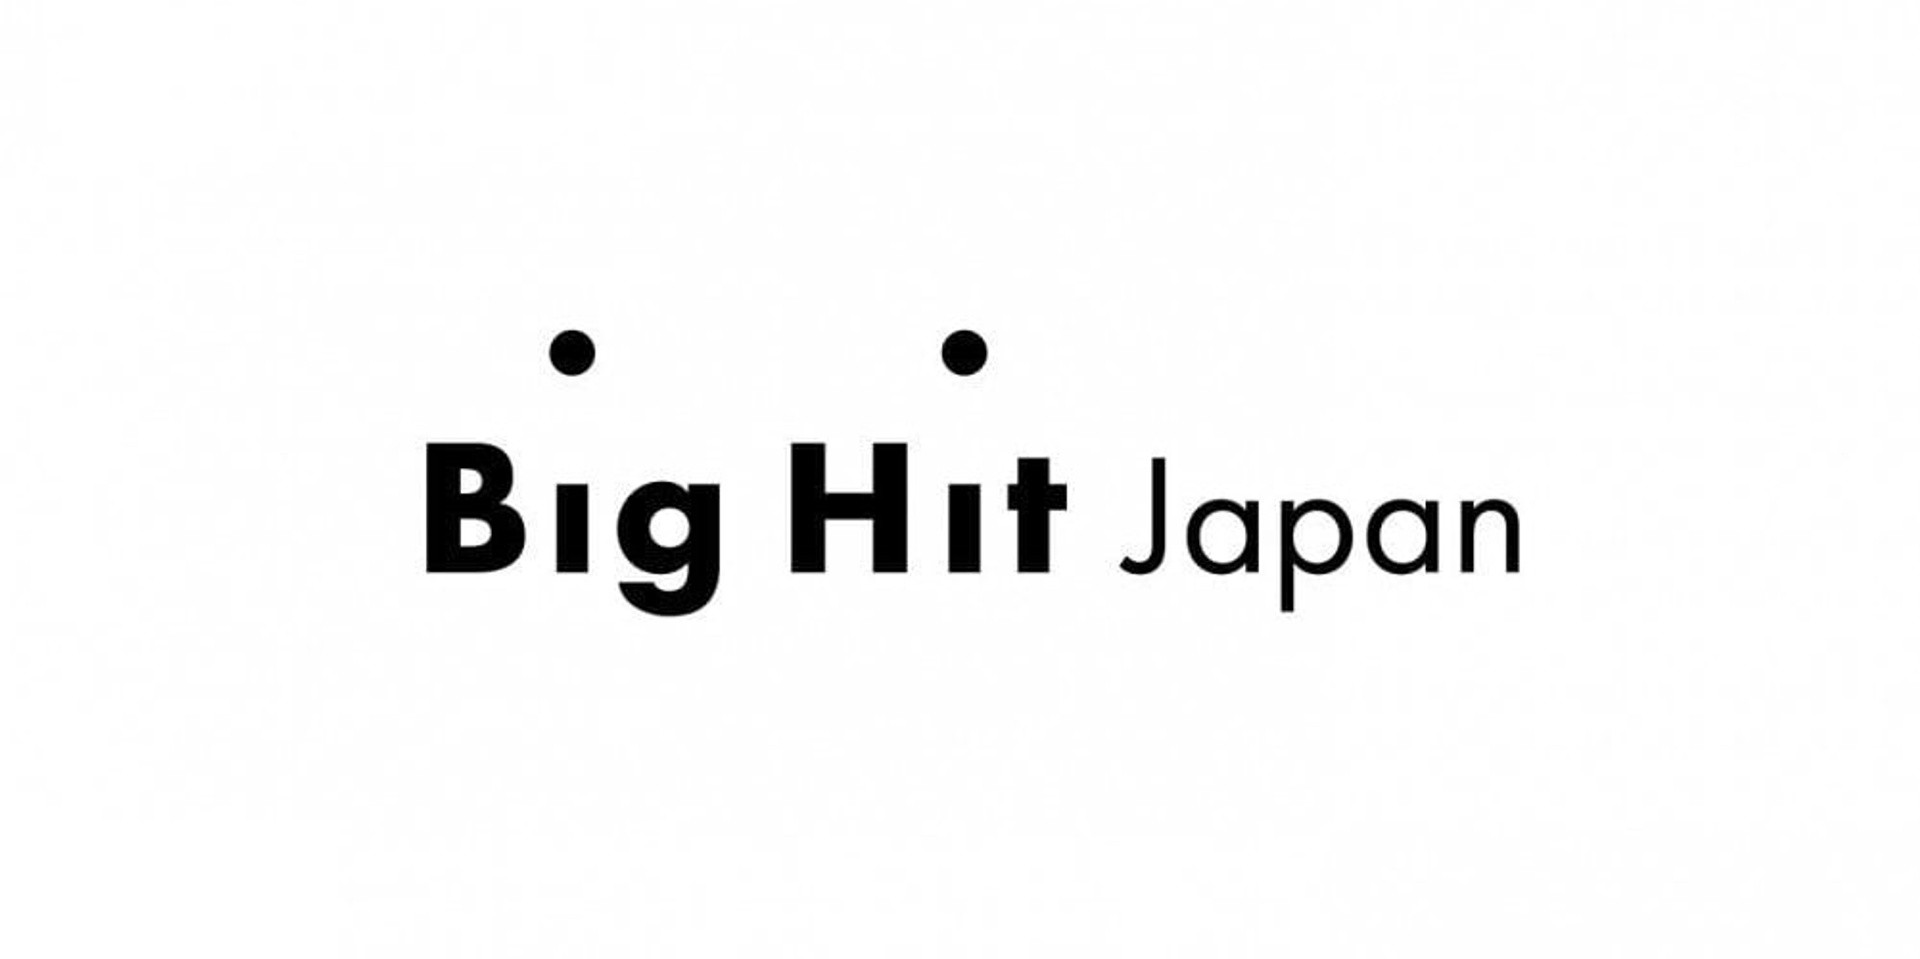 Big Hit Japan announces open call for music producers 